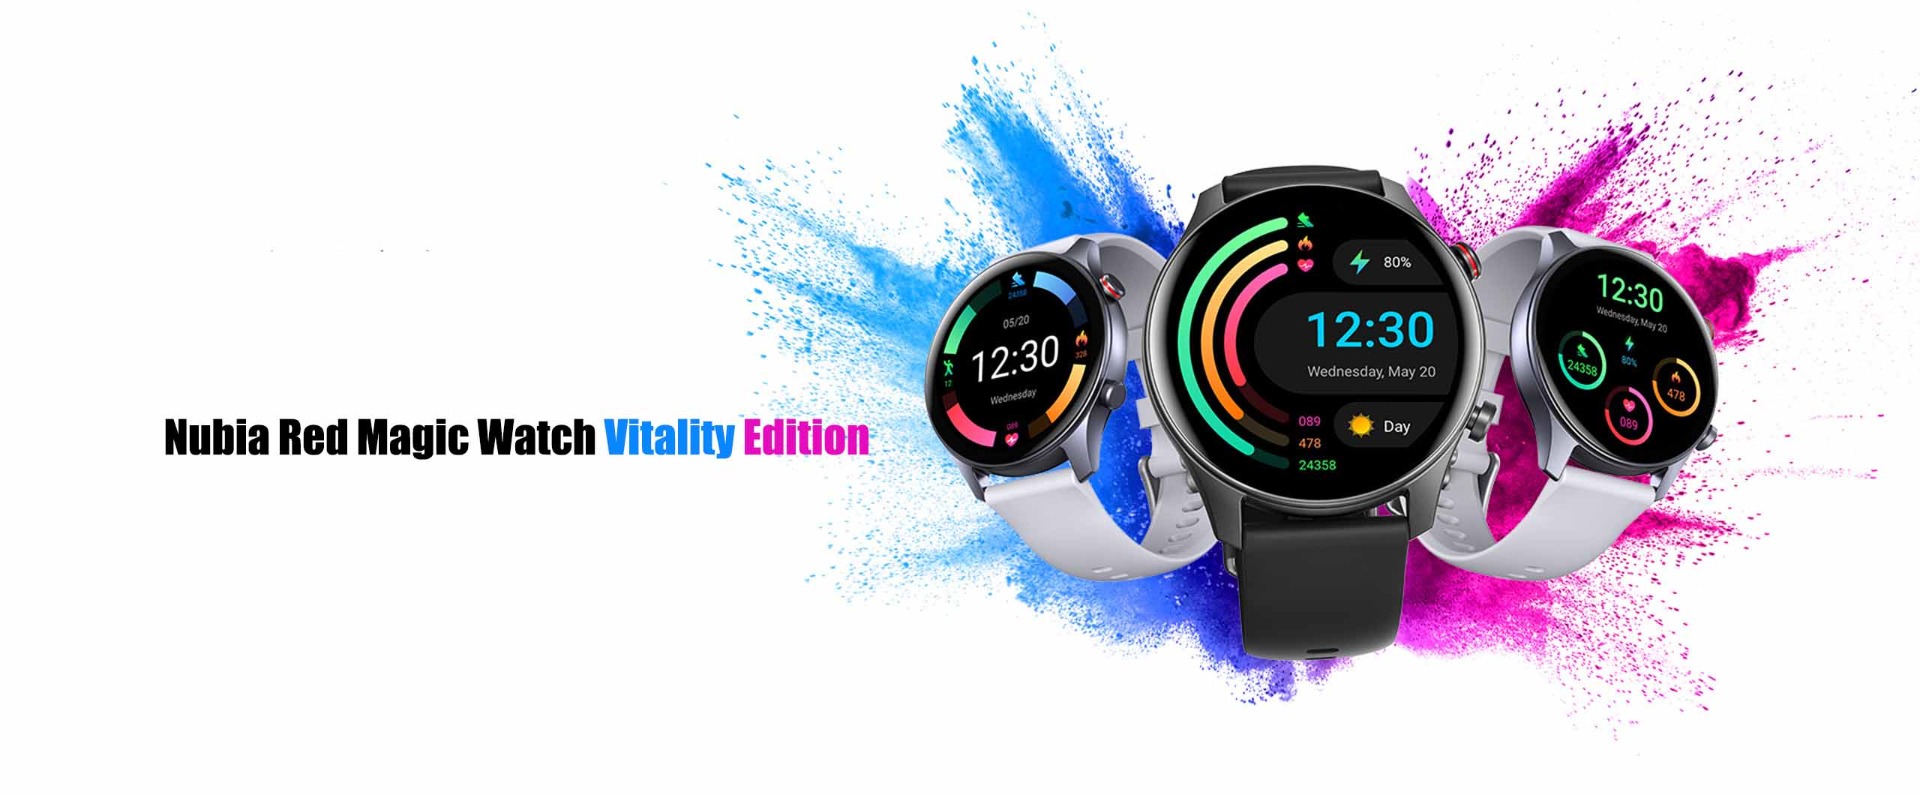 Nubia Red Magic Watch Vitality Edition